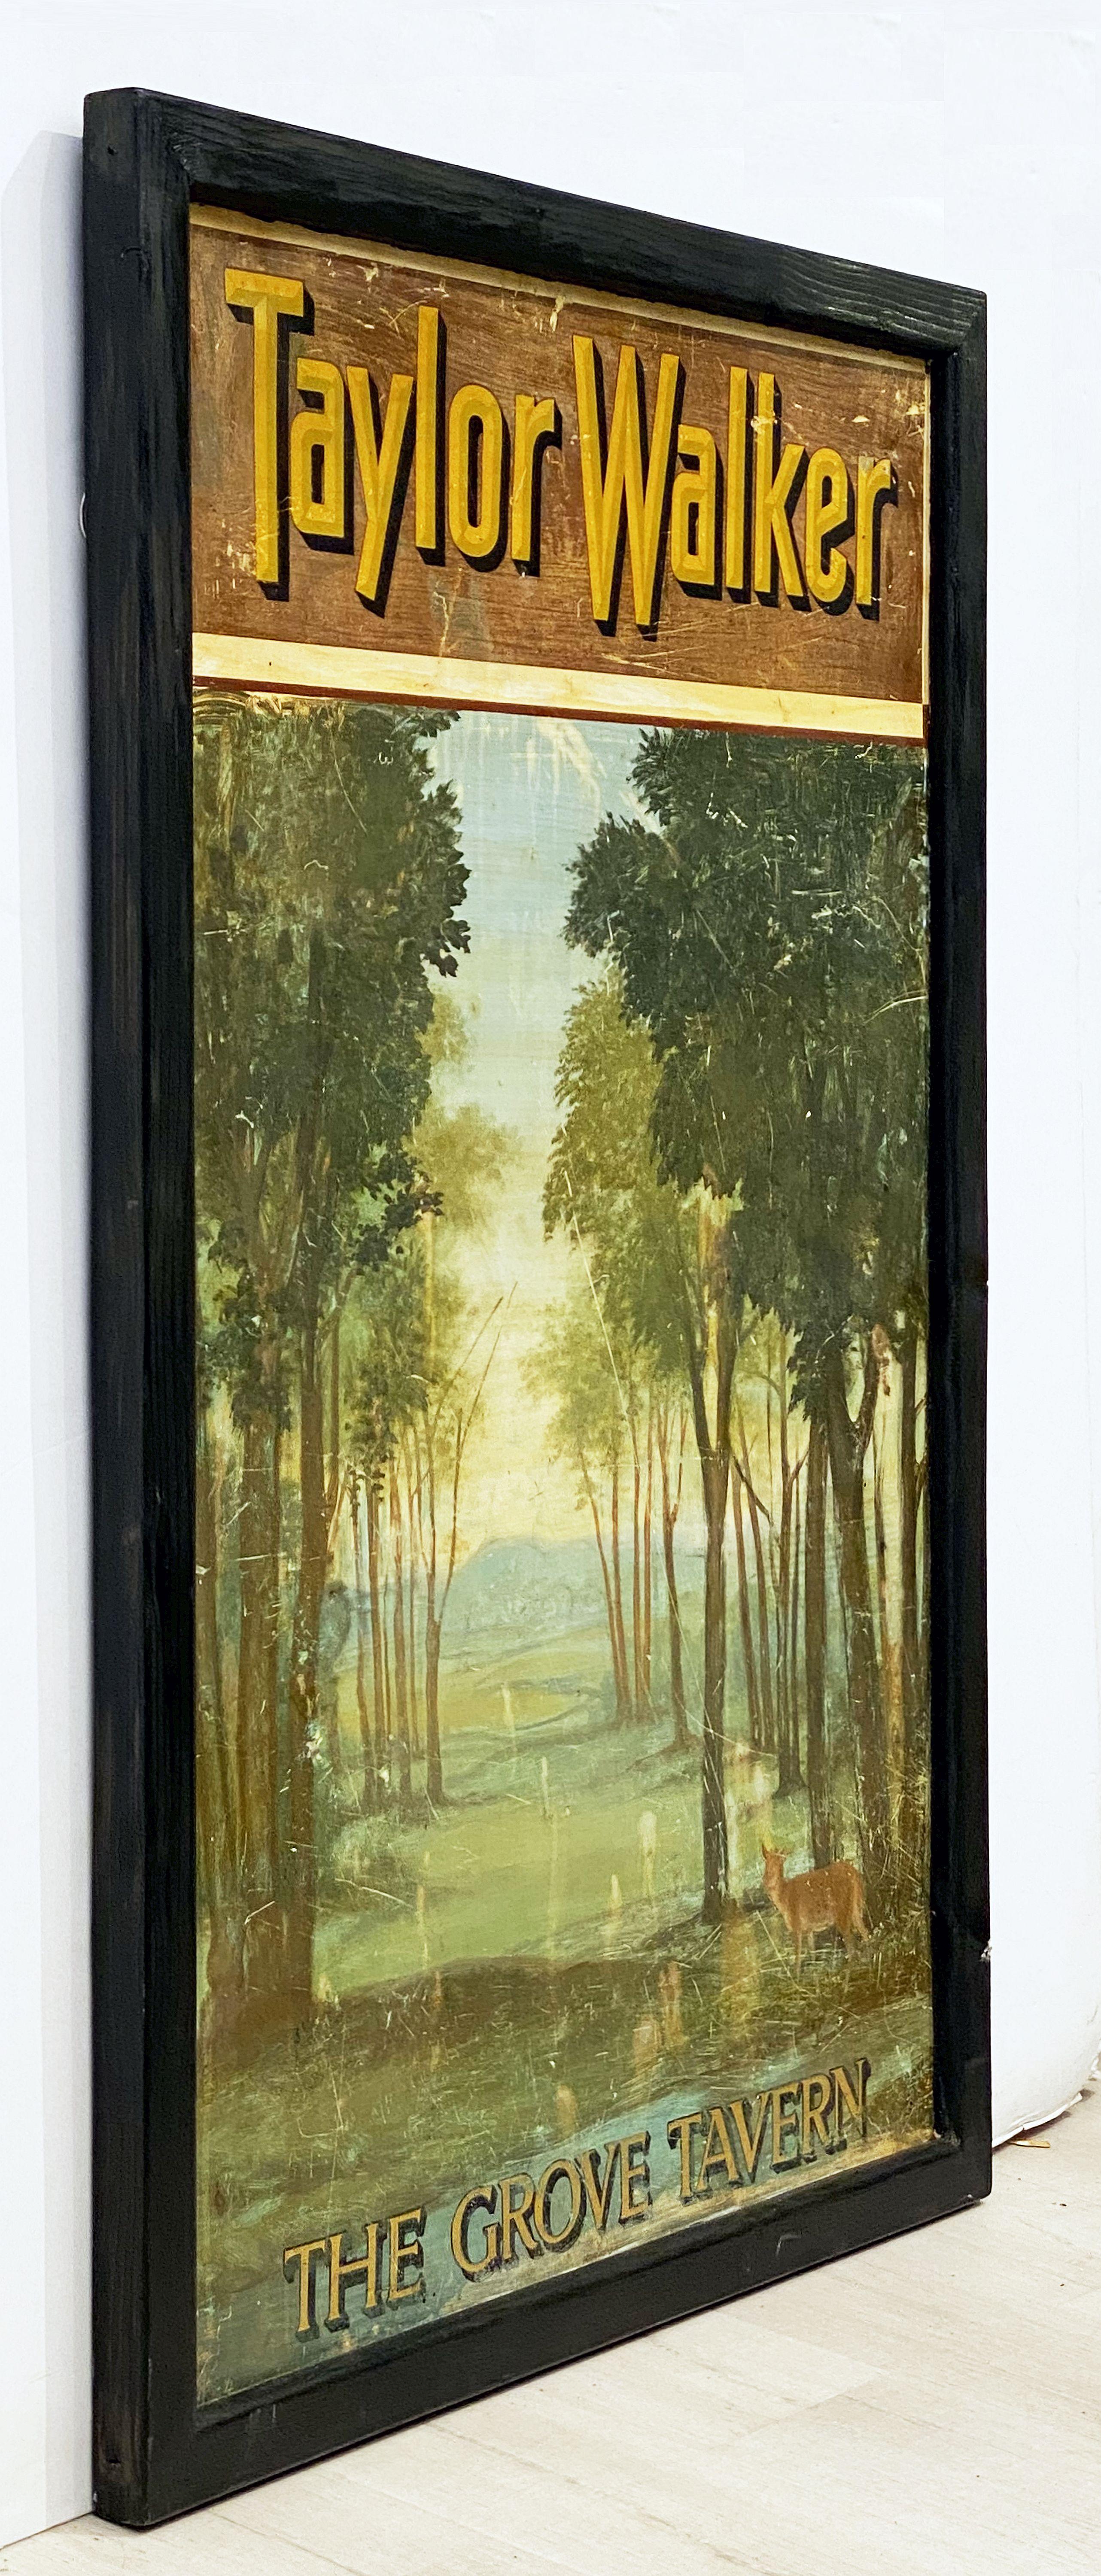 An authentic English pub sign (one-sided) featuring a painting of a path through a grove of trees with a deer in the foreground, entitled: Taylor Walker - The Grove Tavern. 

Taylor Walker Brewing Company was founded in 1730 in Stepney, in the East